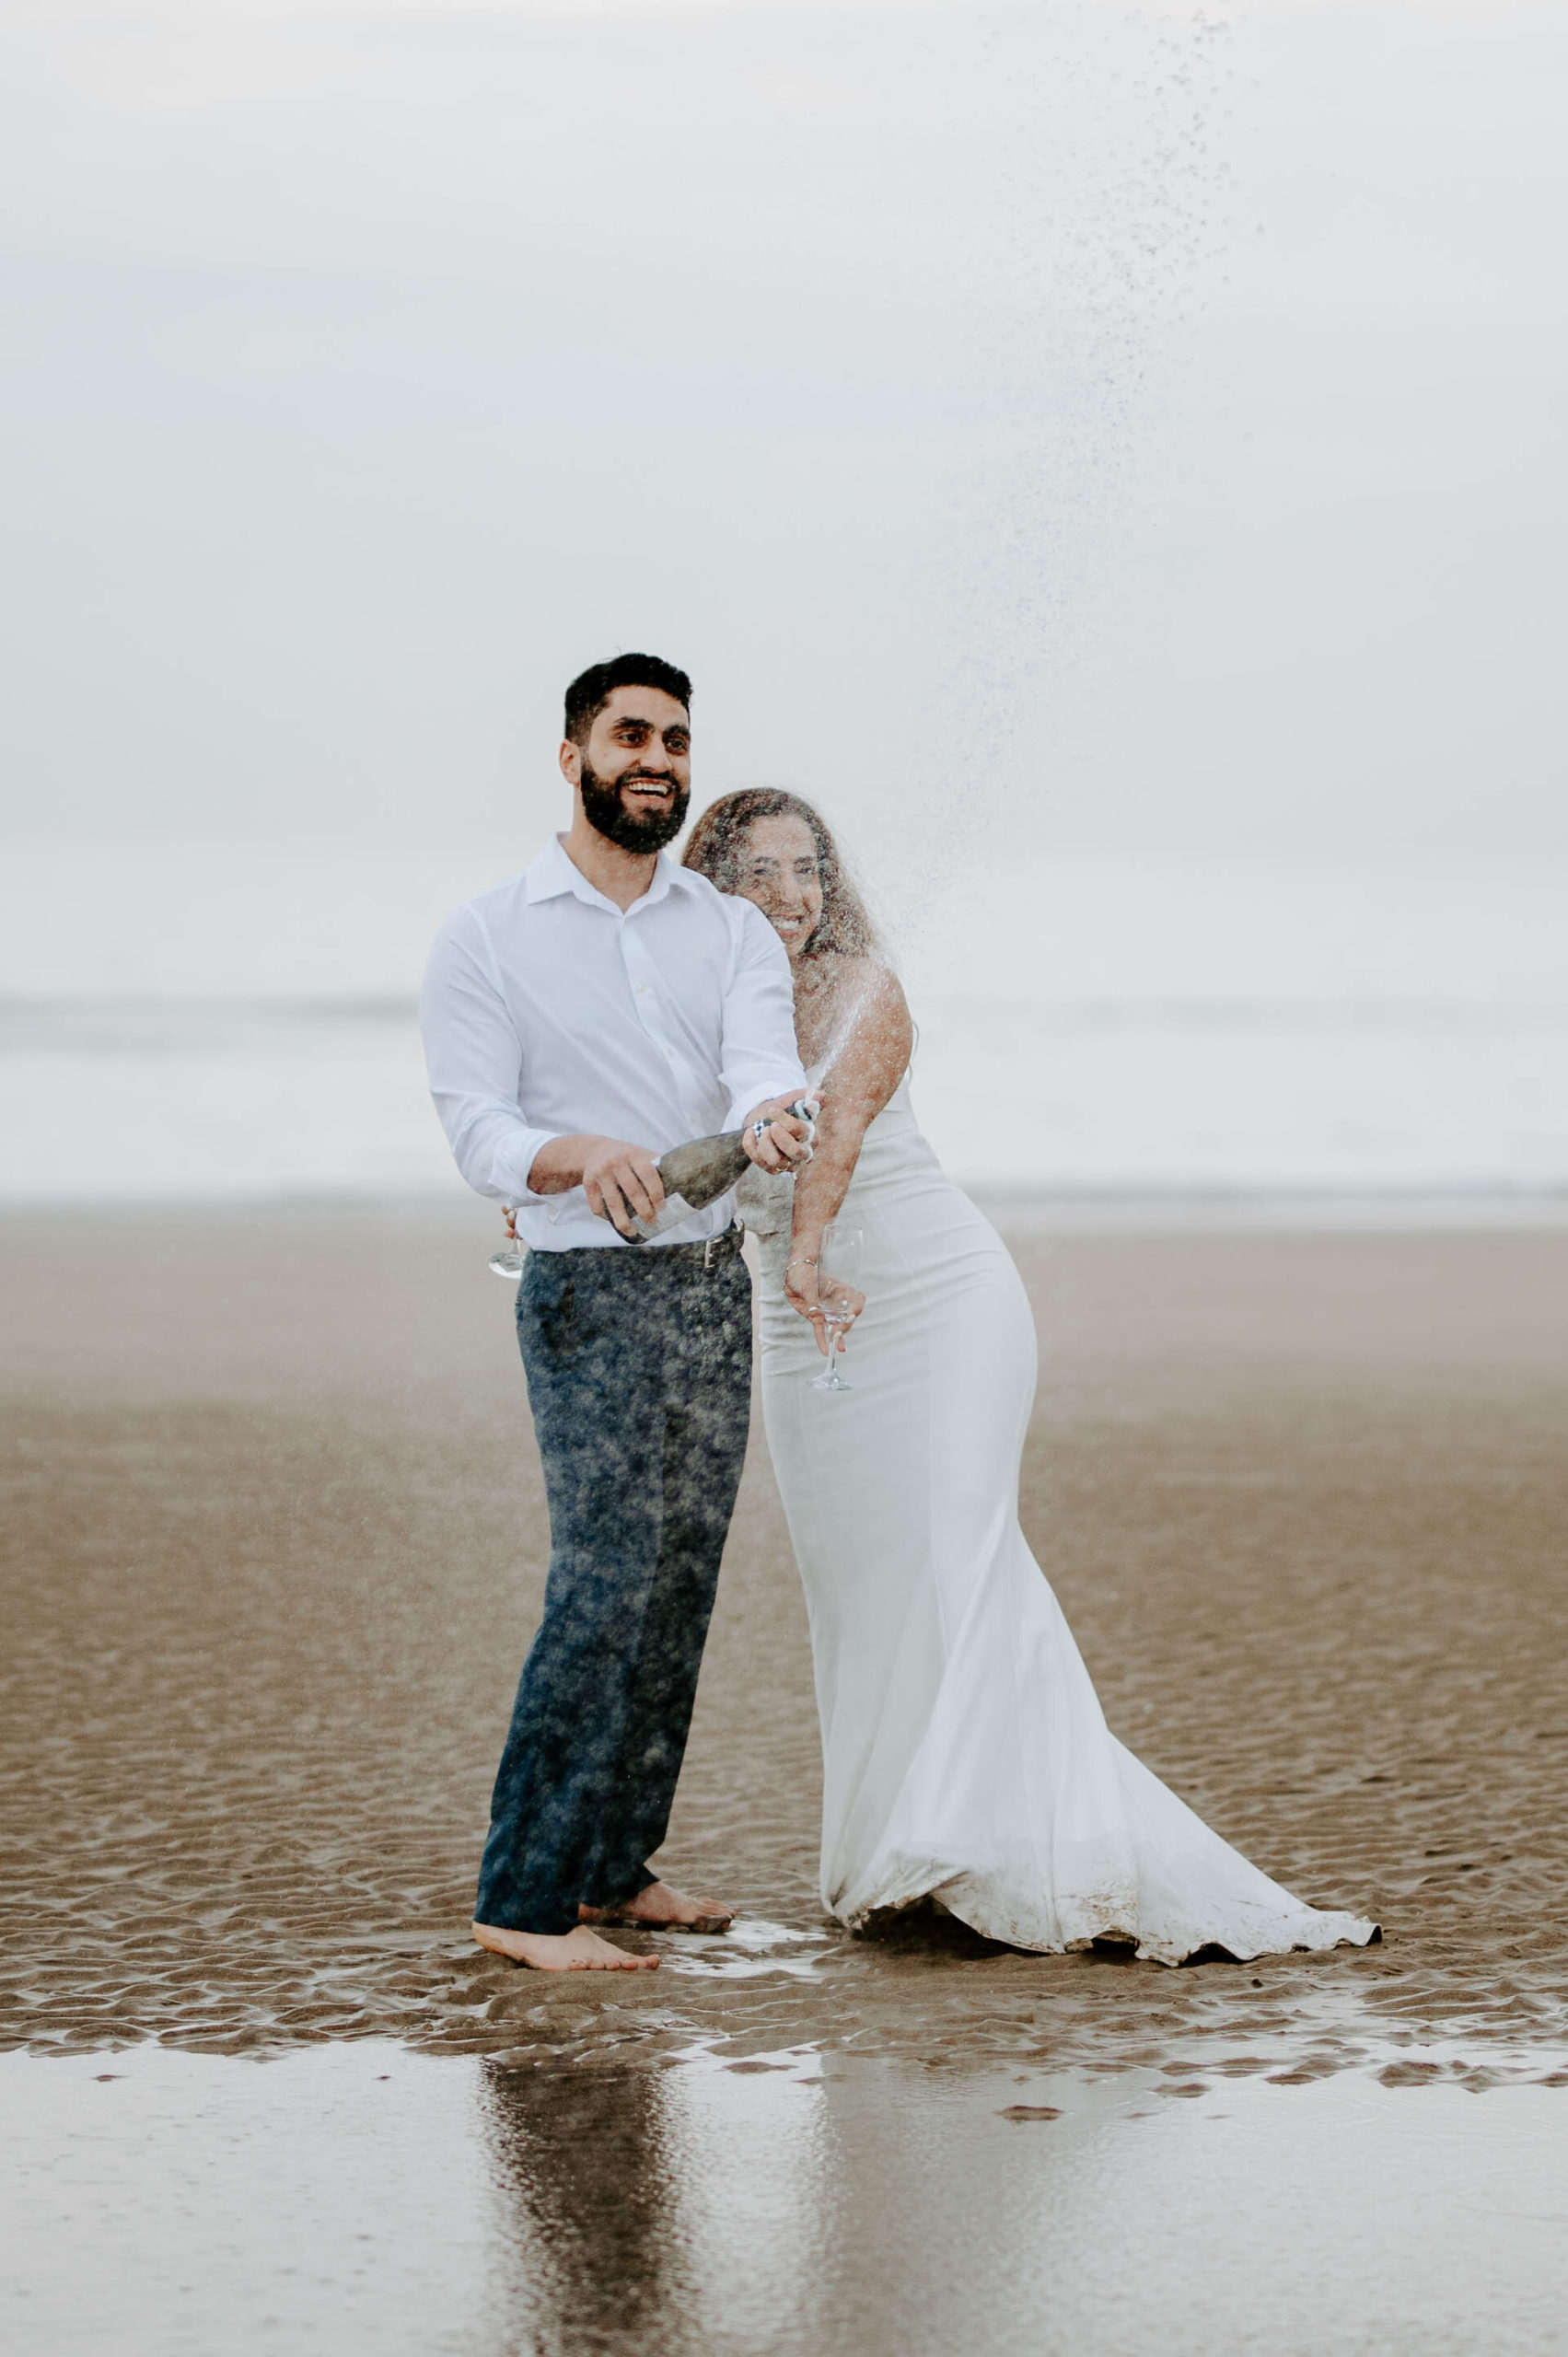 Demiana and Goergeuos - Camber Sands Golden Hour Beach Shoot - Laura Williams Photography-30.jpg